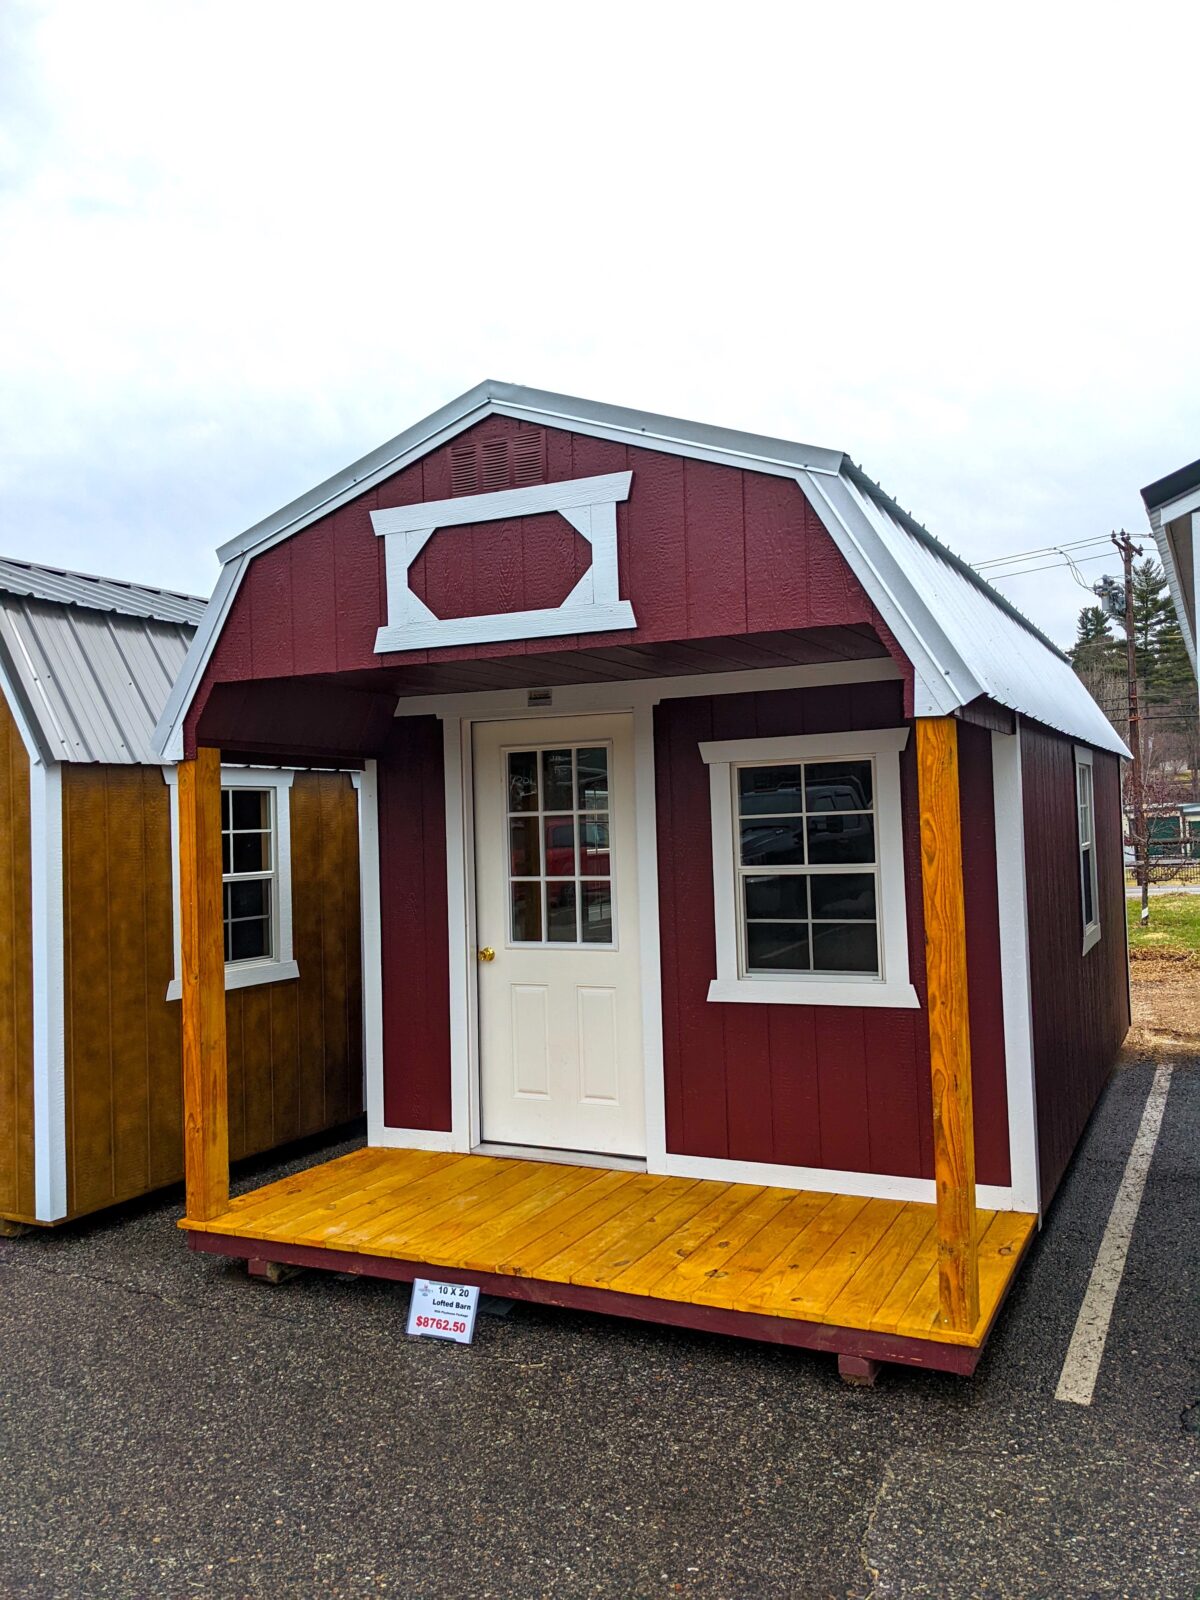 Do you want to save money on storage fees? You could buy a prefab shed like the one pictured here, or you could build your own. (Tim Carter/TNS)